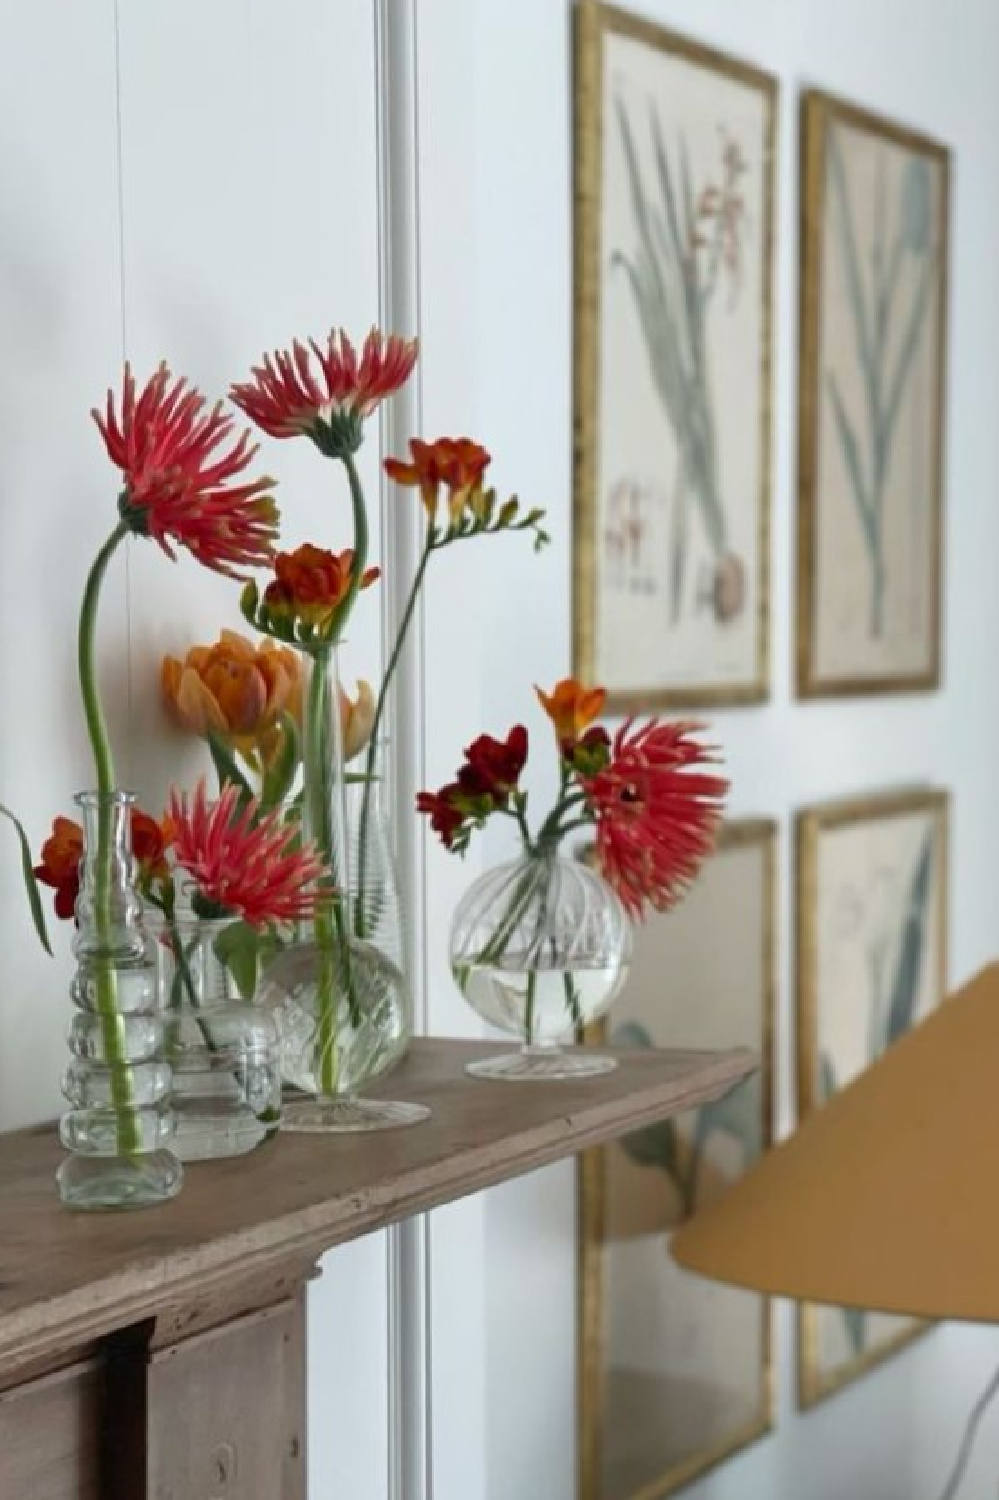 Cheerful flowers on a mantel. Timeless interior design by Shannon Bowers with nods to European antiques, patina, understated elegance, and sophisticated simplicity. #shannonbowers #timelessinteriors